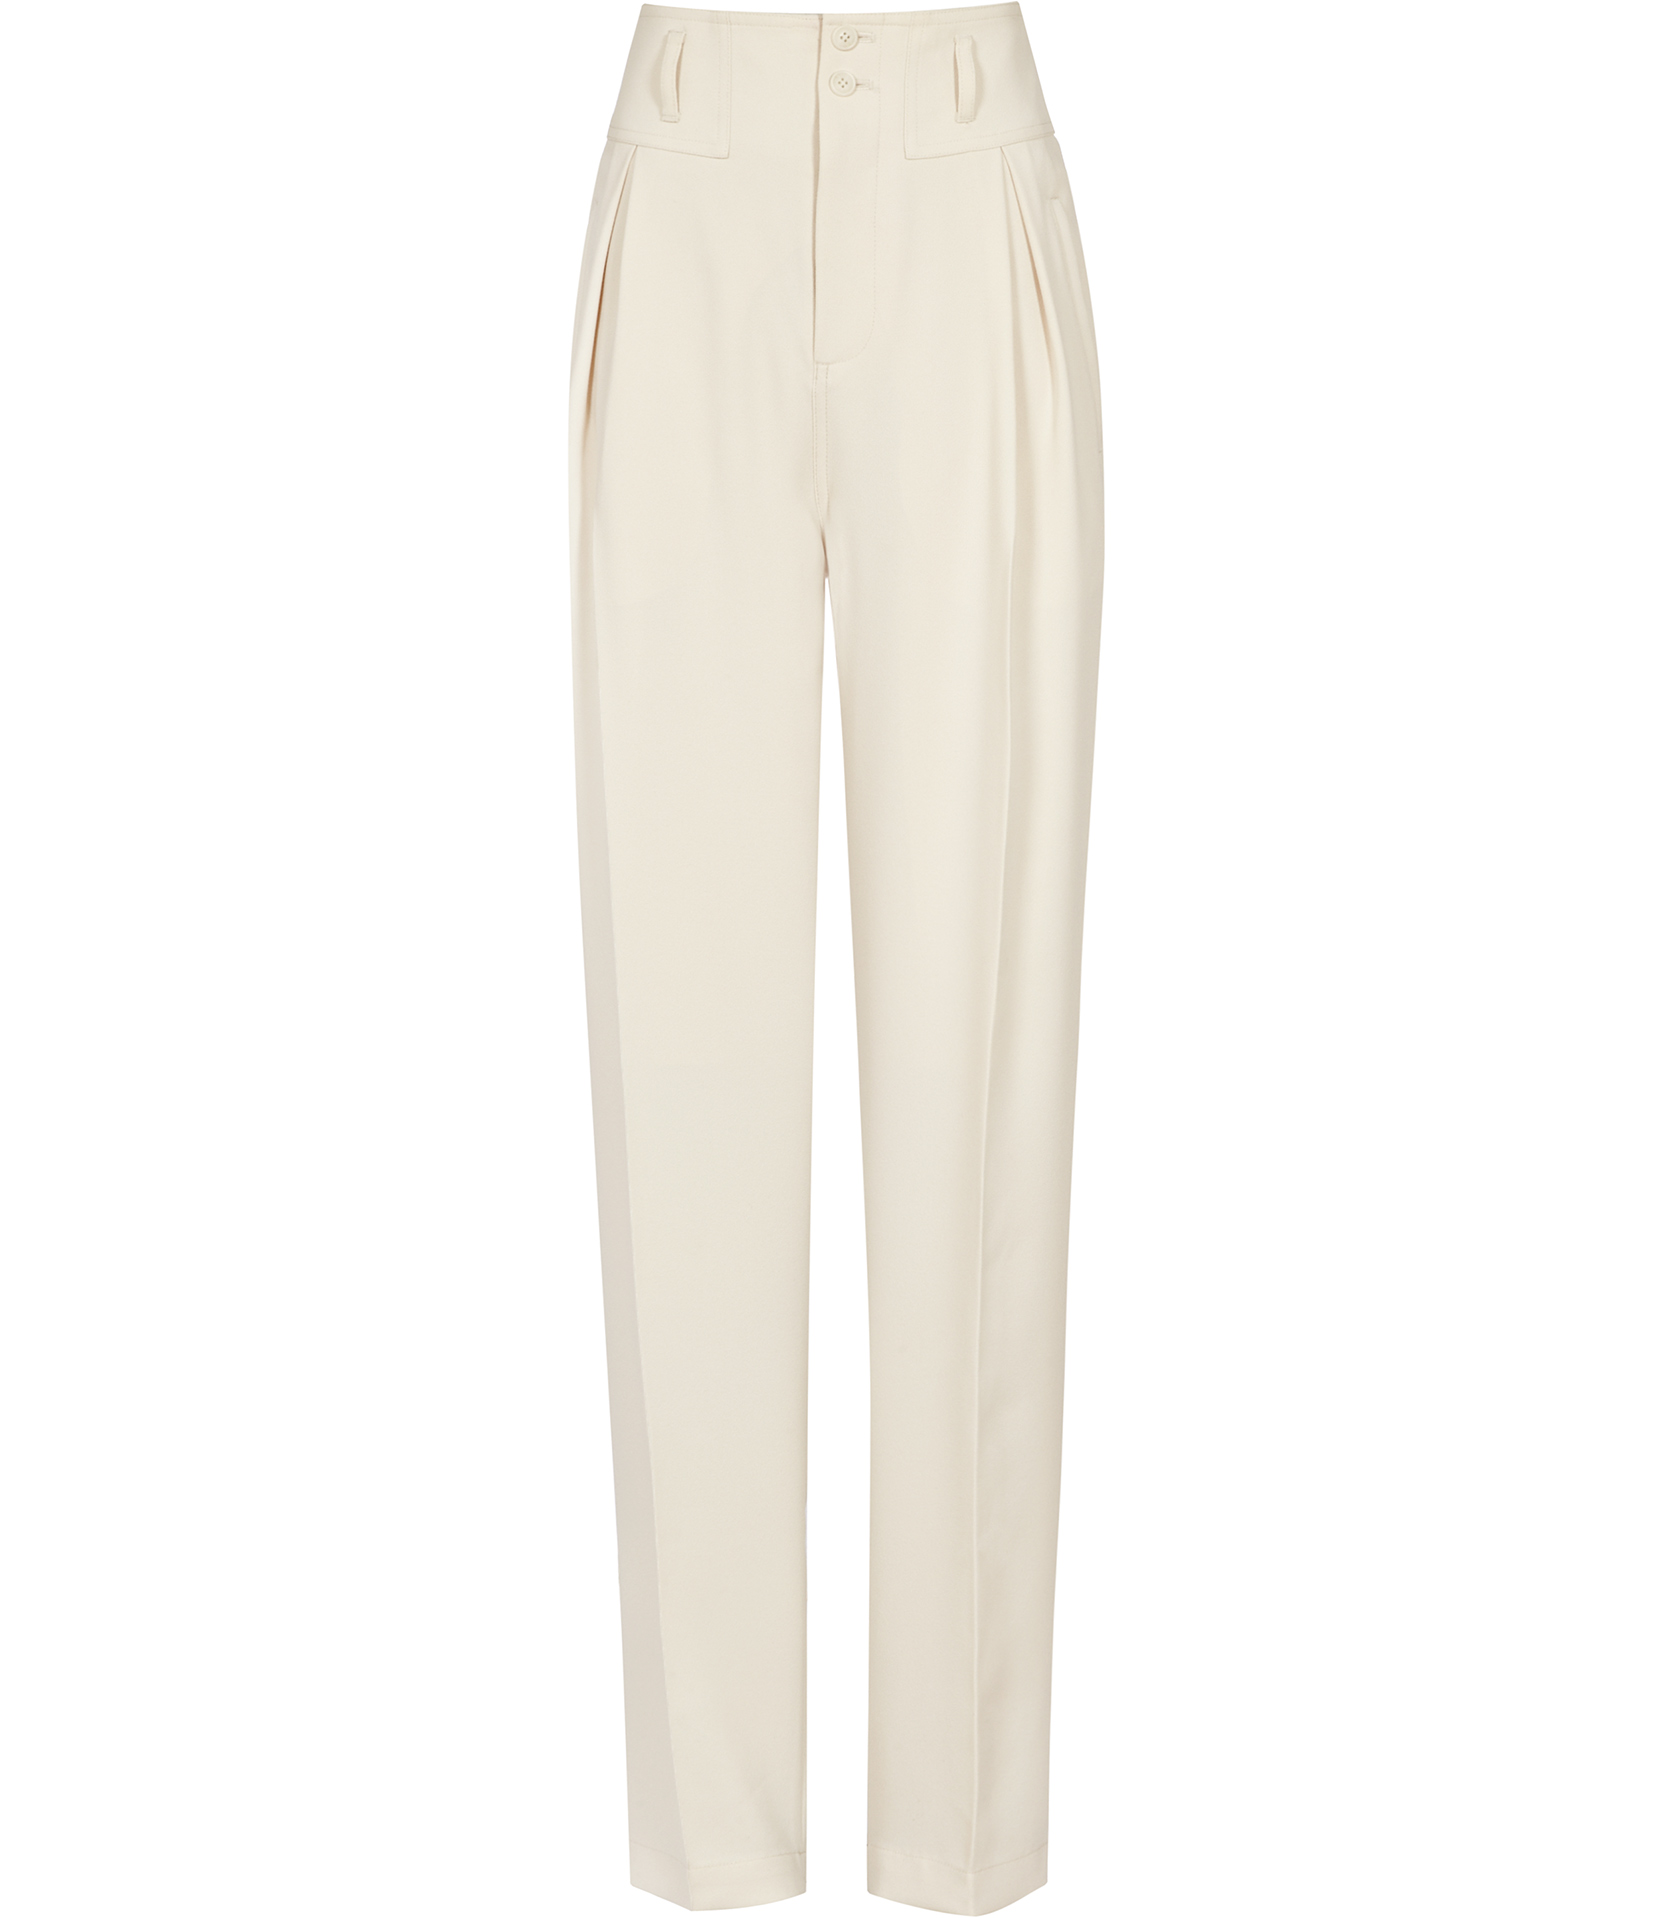 Reiss Sara Front Fold Trousers in Natural - Lyst